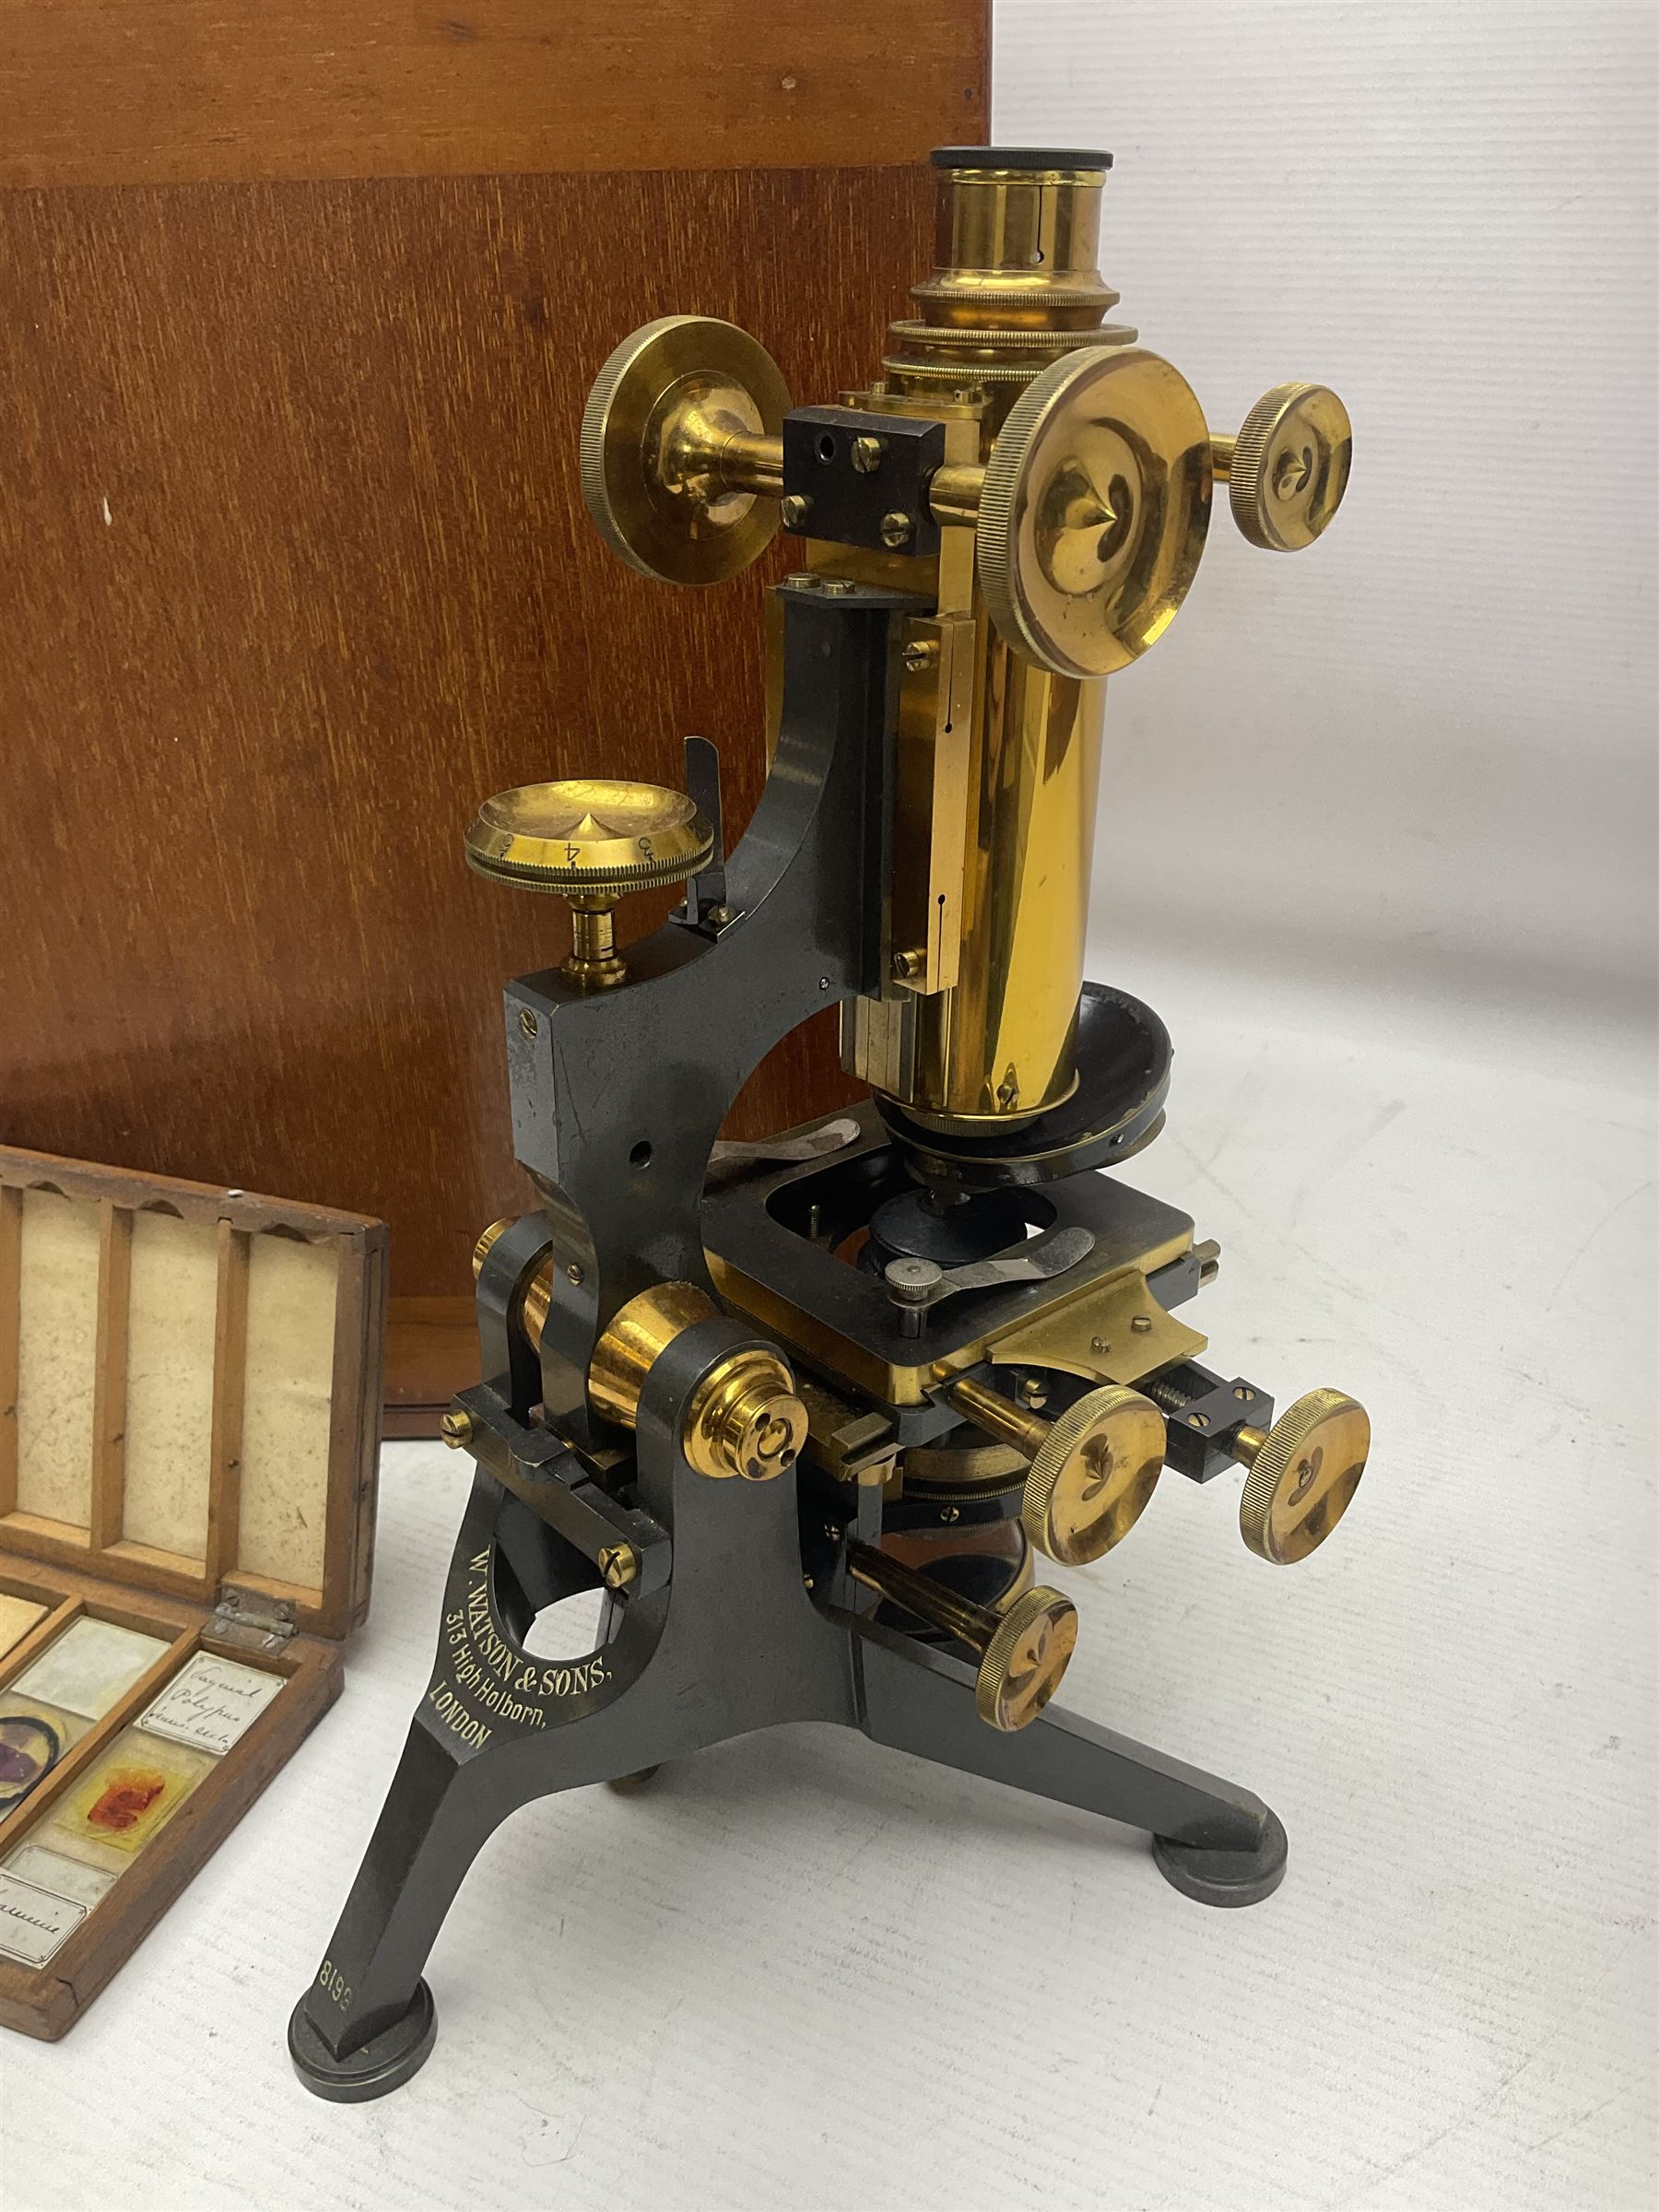 W. Watson & Sons Ltd lacquered brass compound microscope circa 1910 - Image 8 of 11